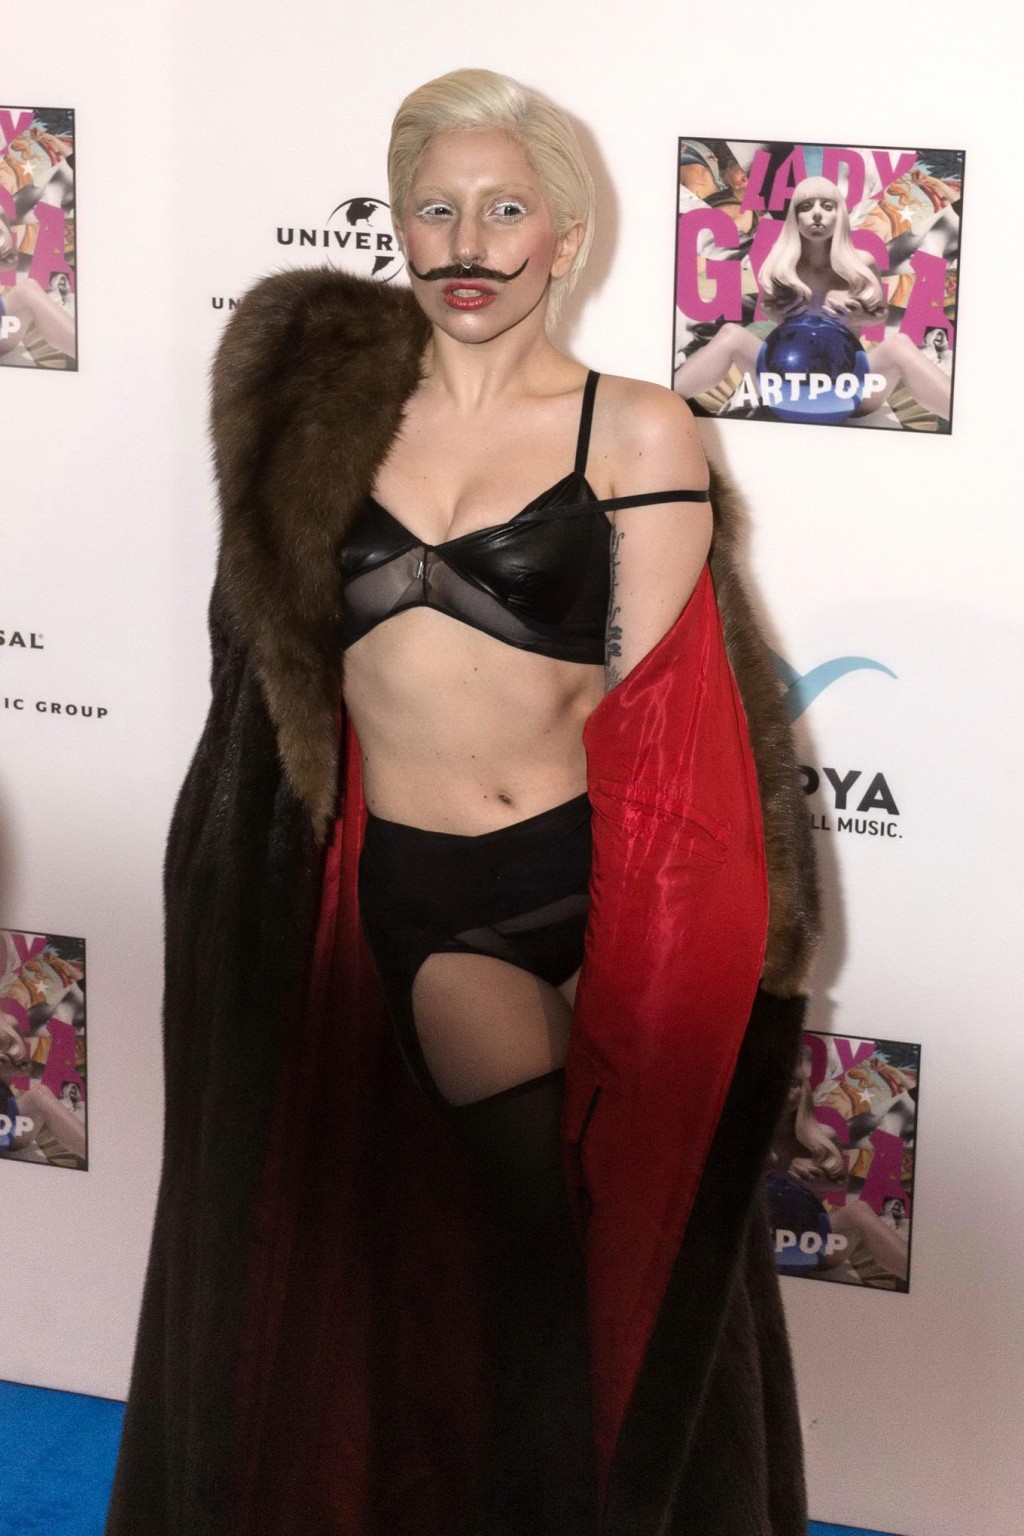 Lady Gaga wearing lingerie and fake moustache at her album promotion in Berlin #75214987